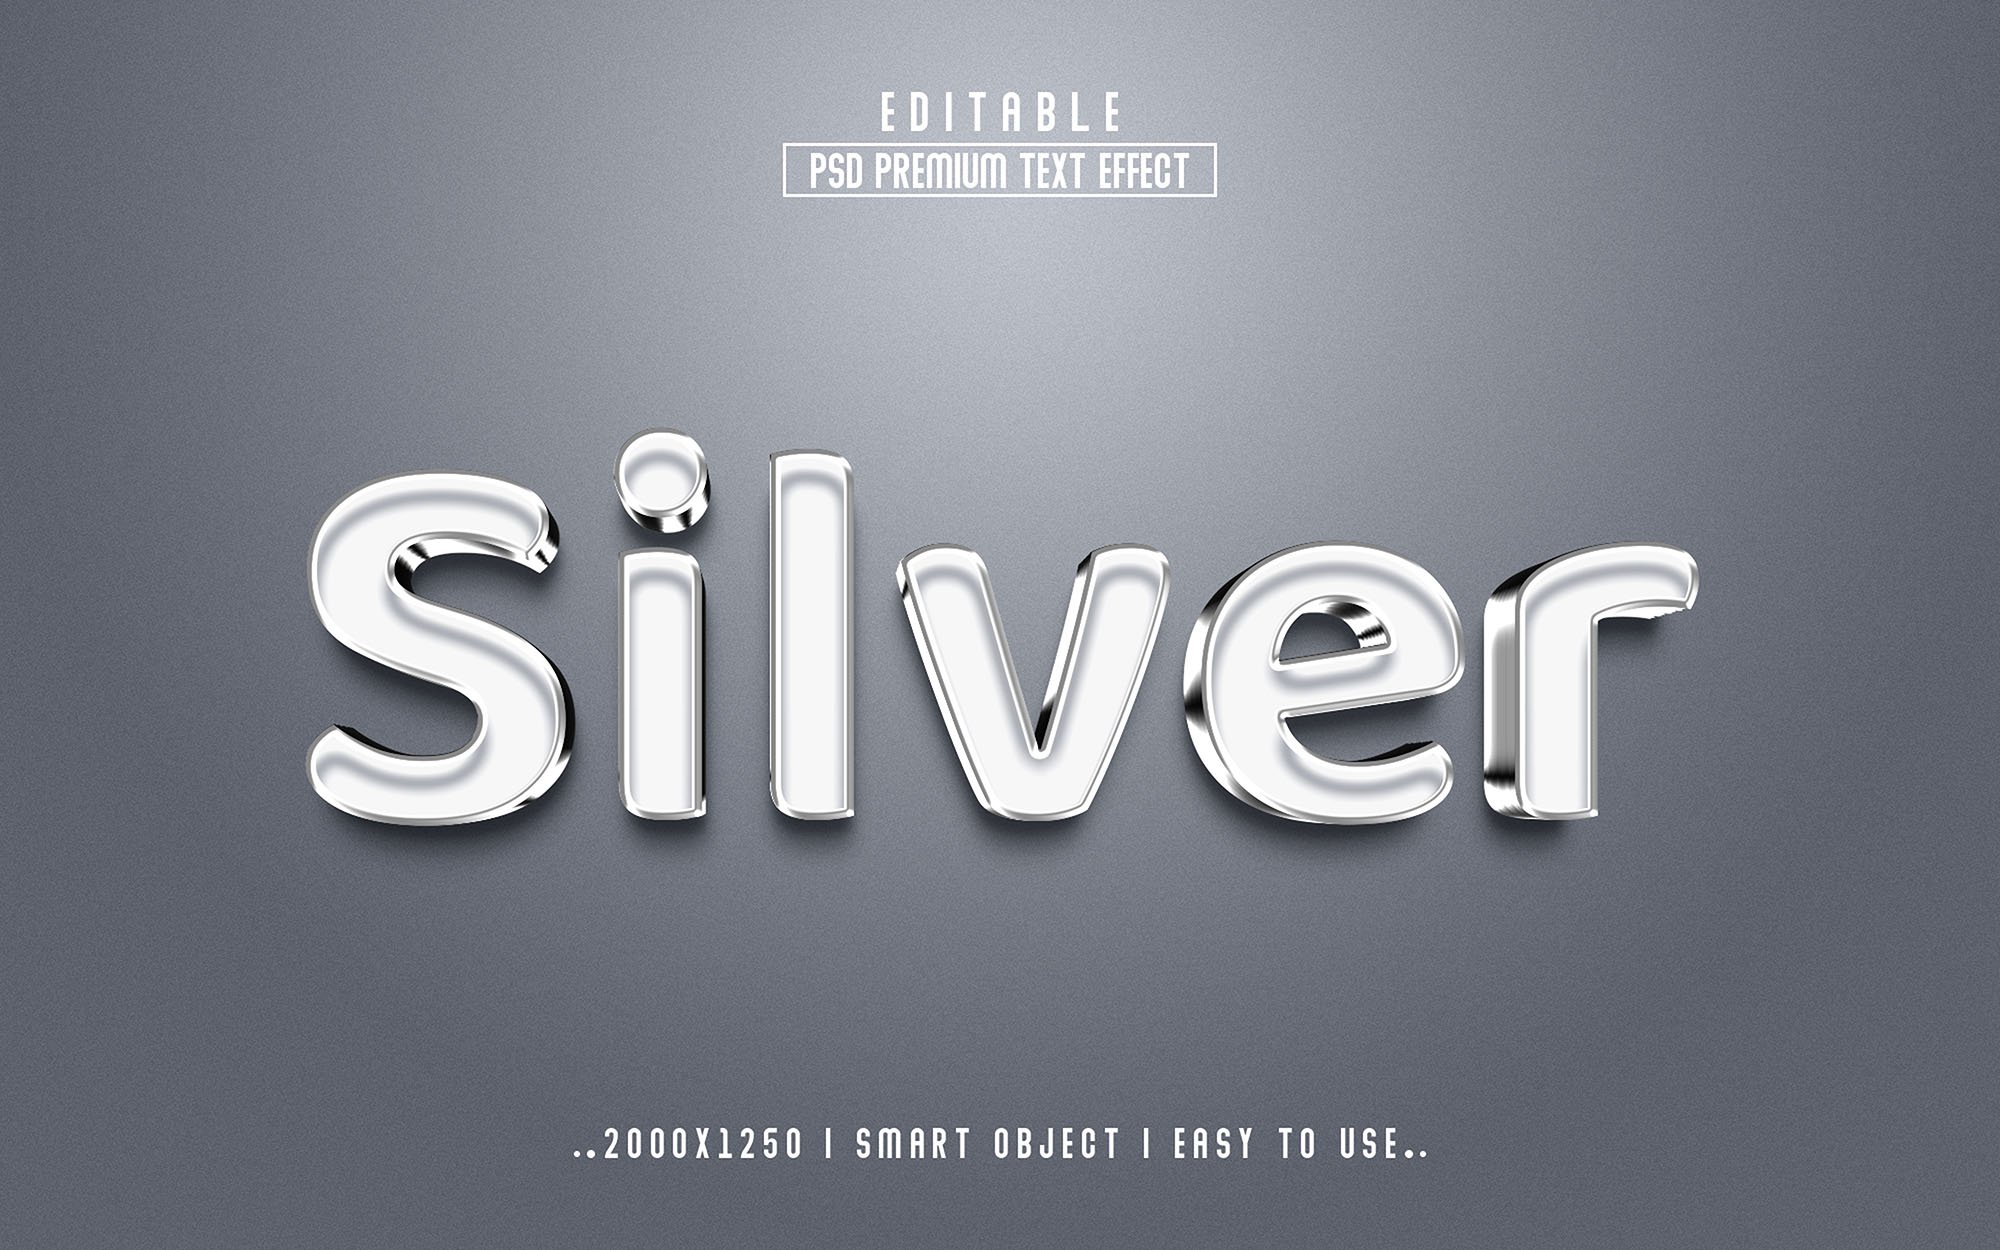 Silver 3D Editable Text Effect stylecover image.